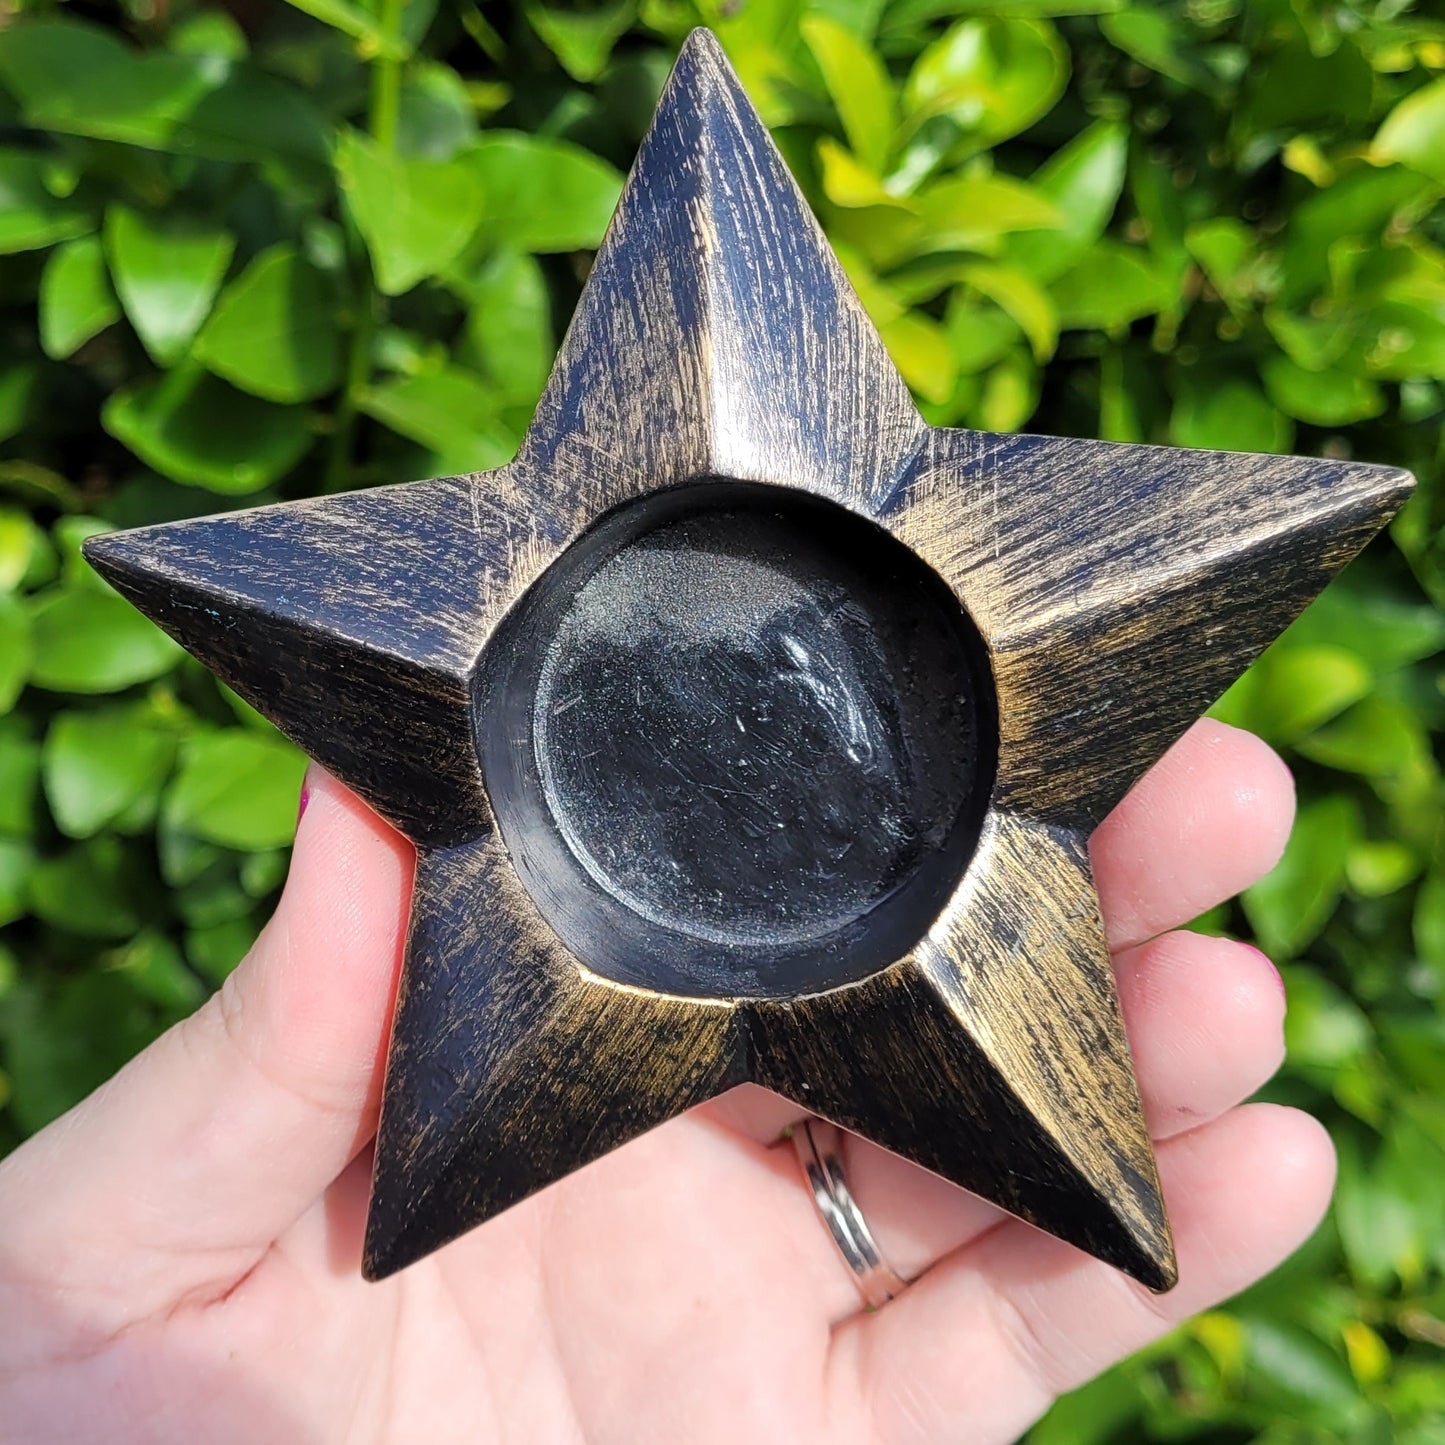 Wood Star Shaped Sphere Display Stand, in Black and Bronze, for Crystal Balls 2" to 3.5" (50mm to 90mm)